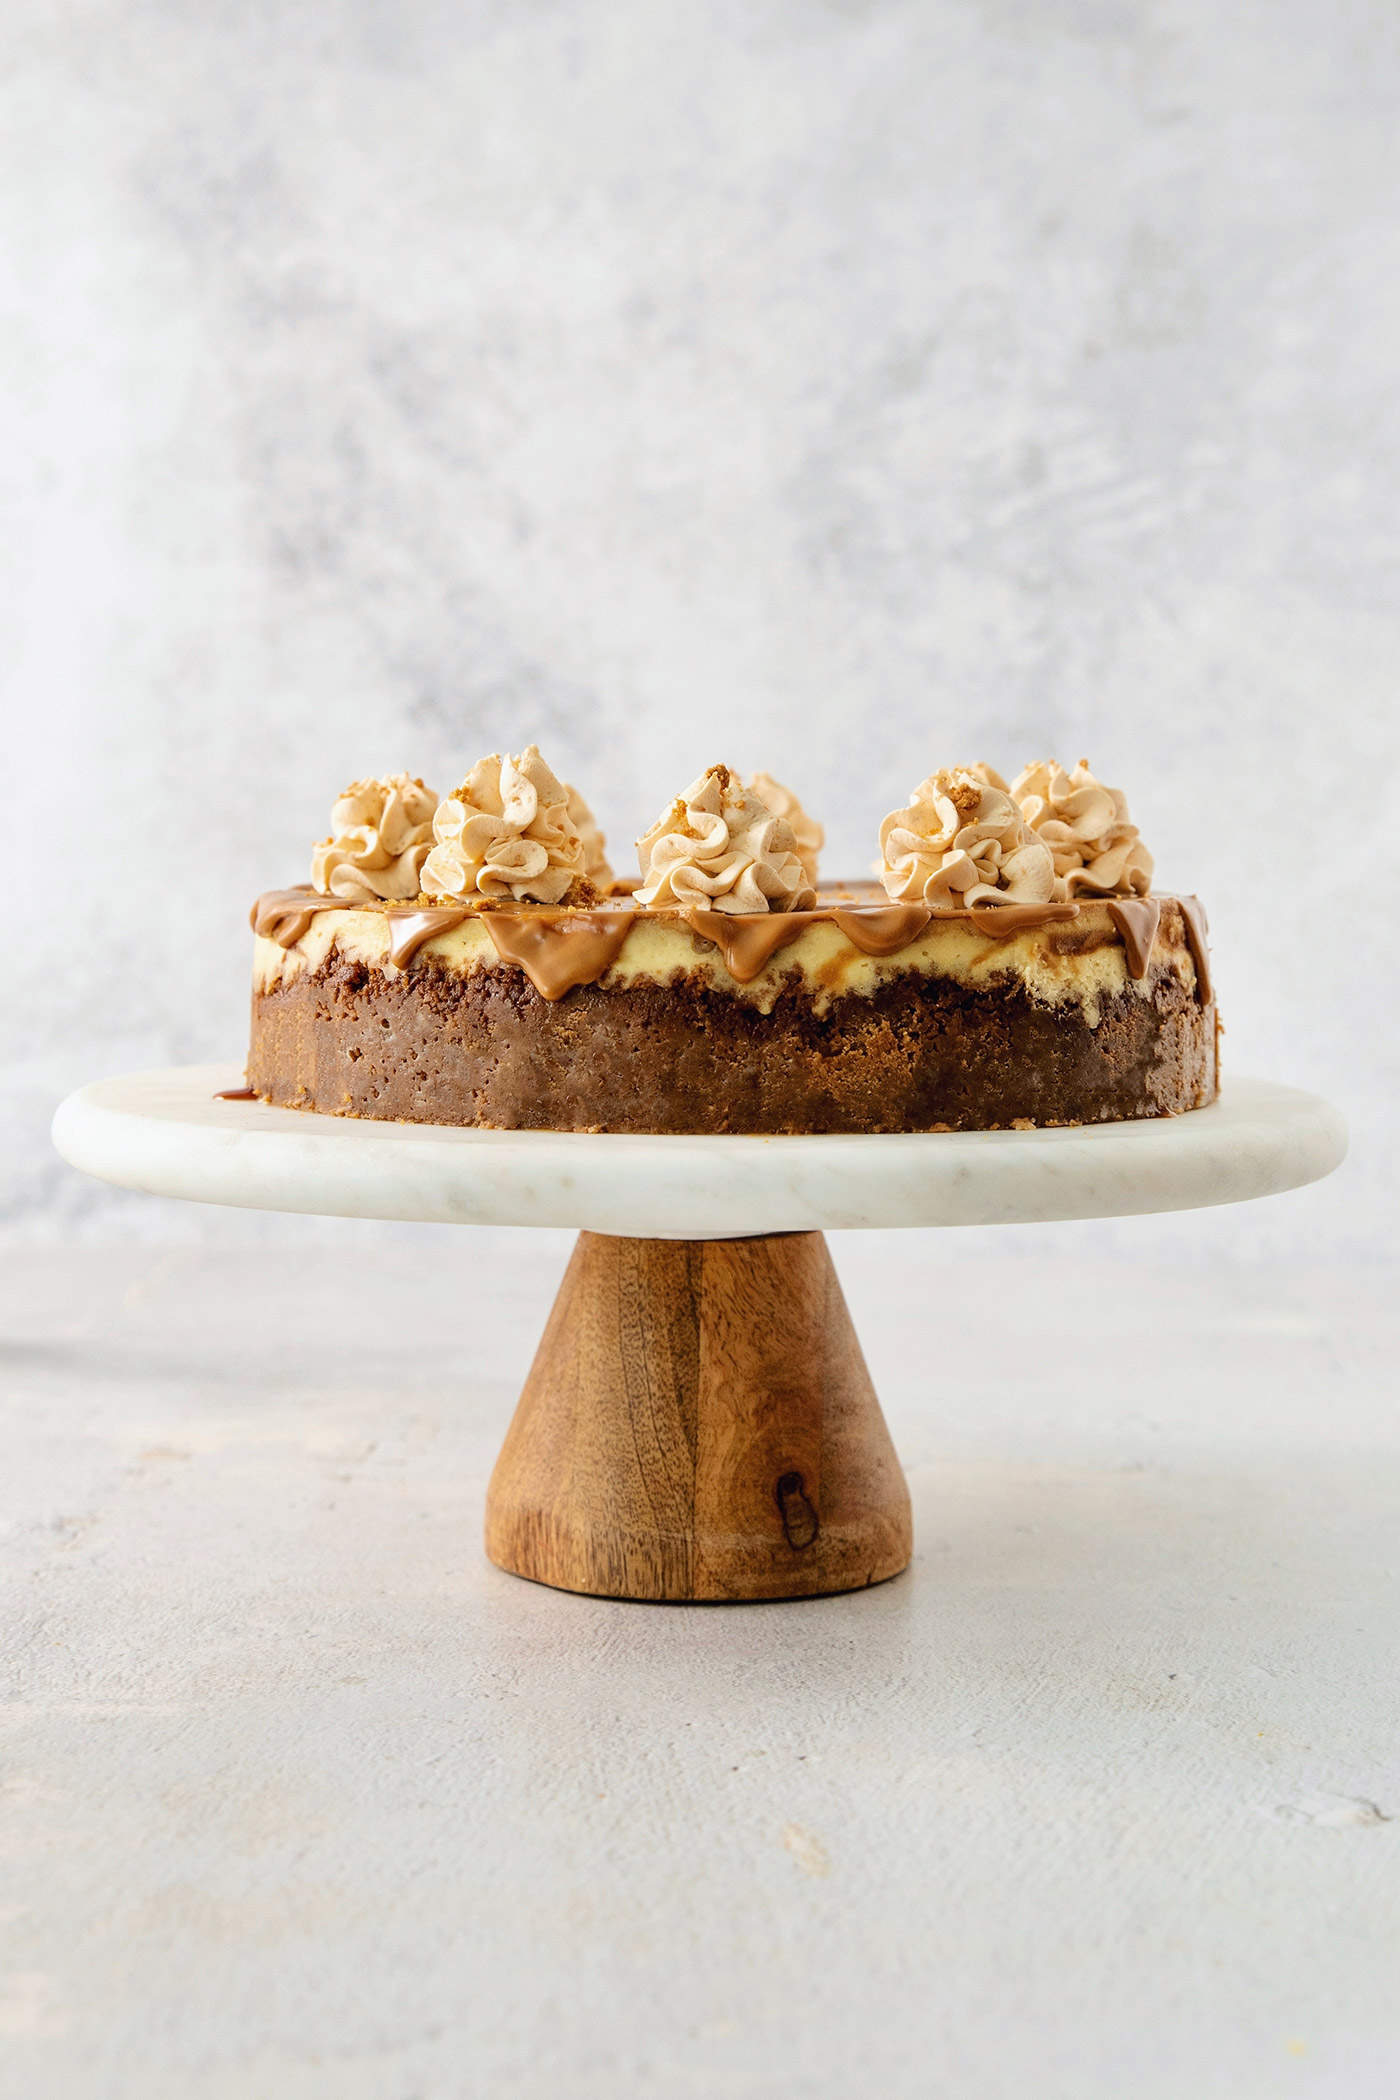 A biscoff cheesecake topped with butterscotch whipped cream is shown on a cake stand.